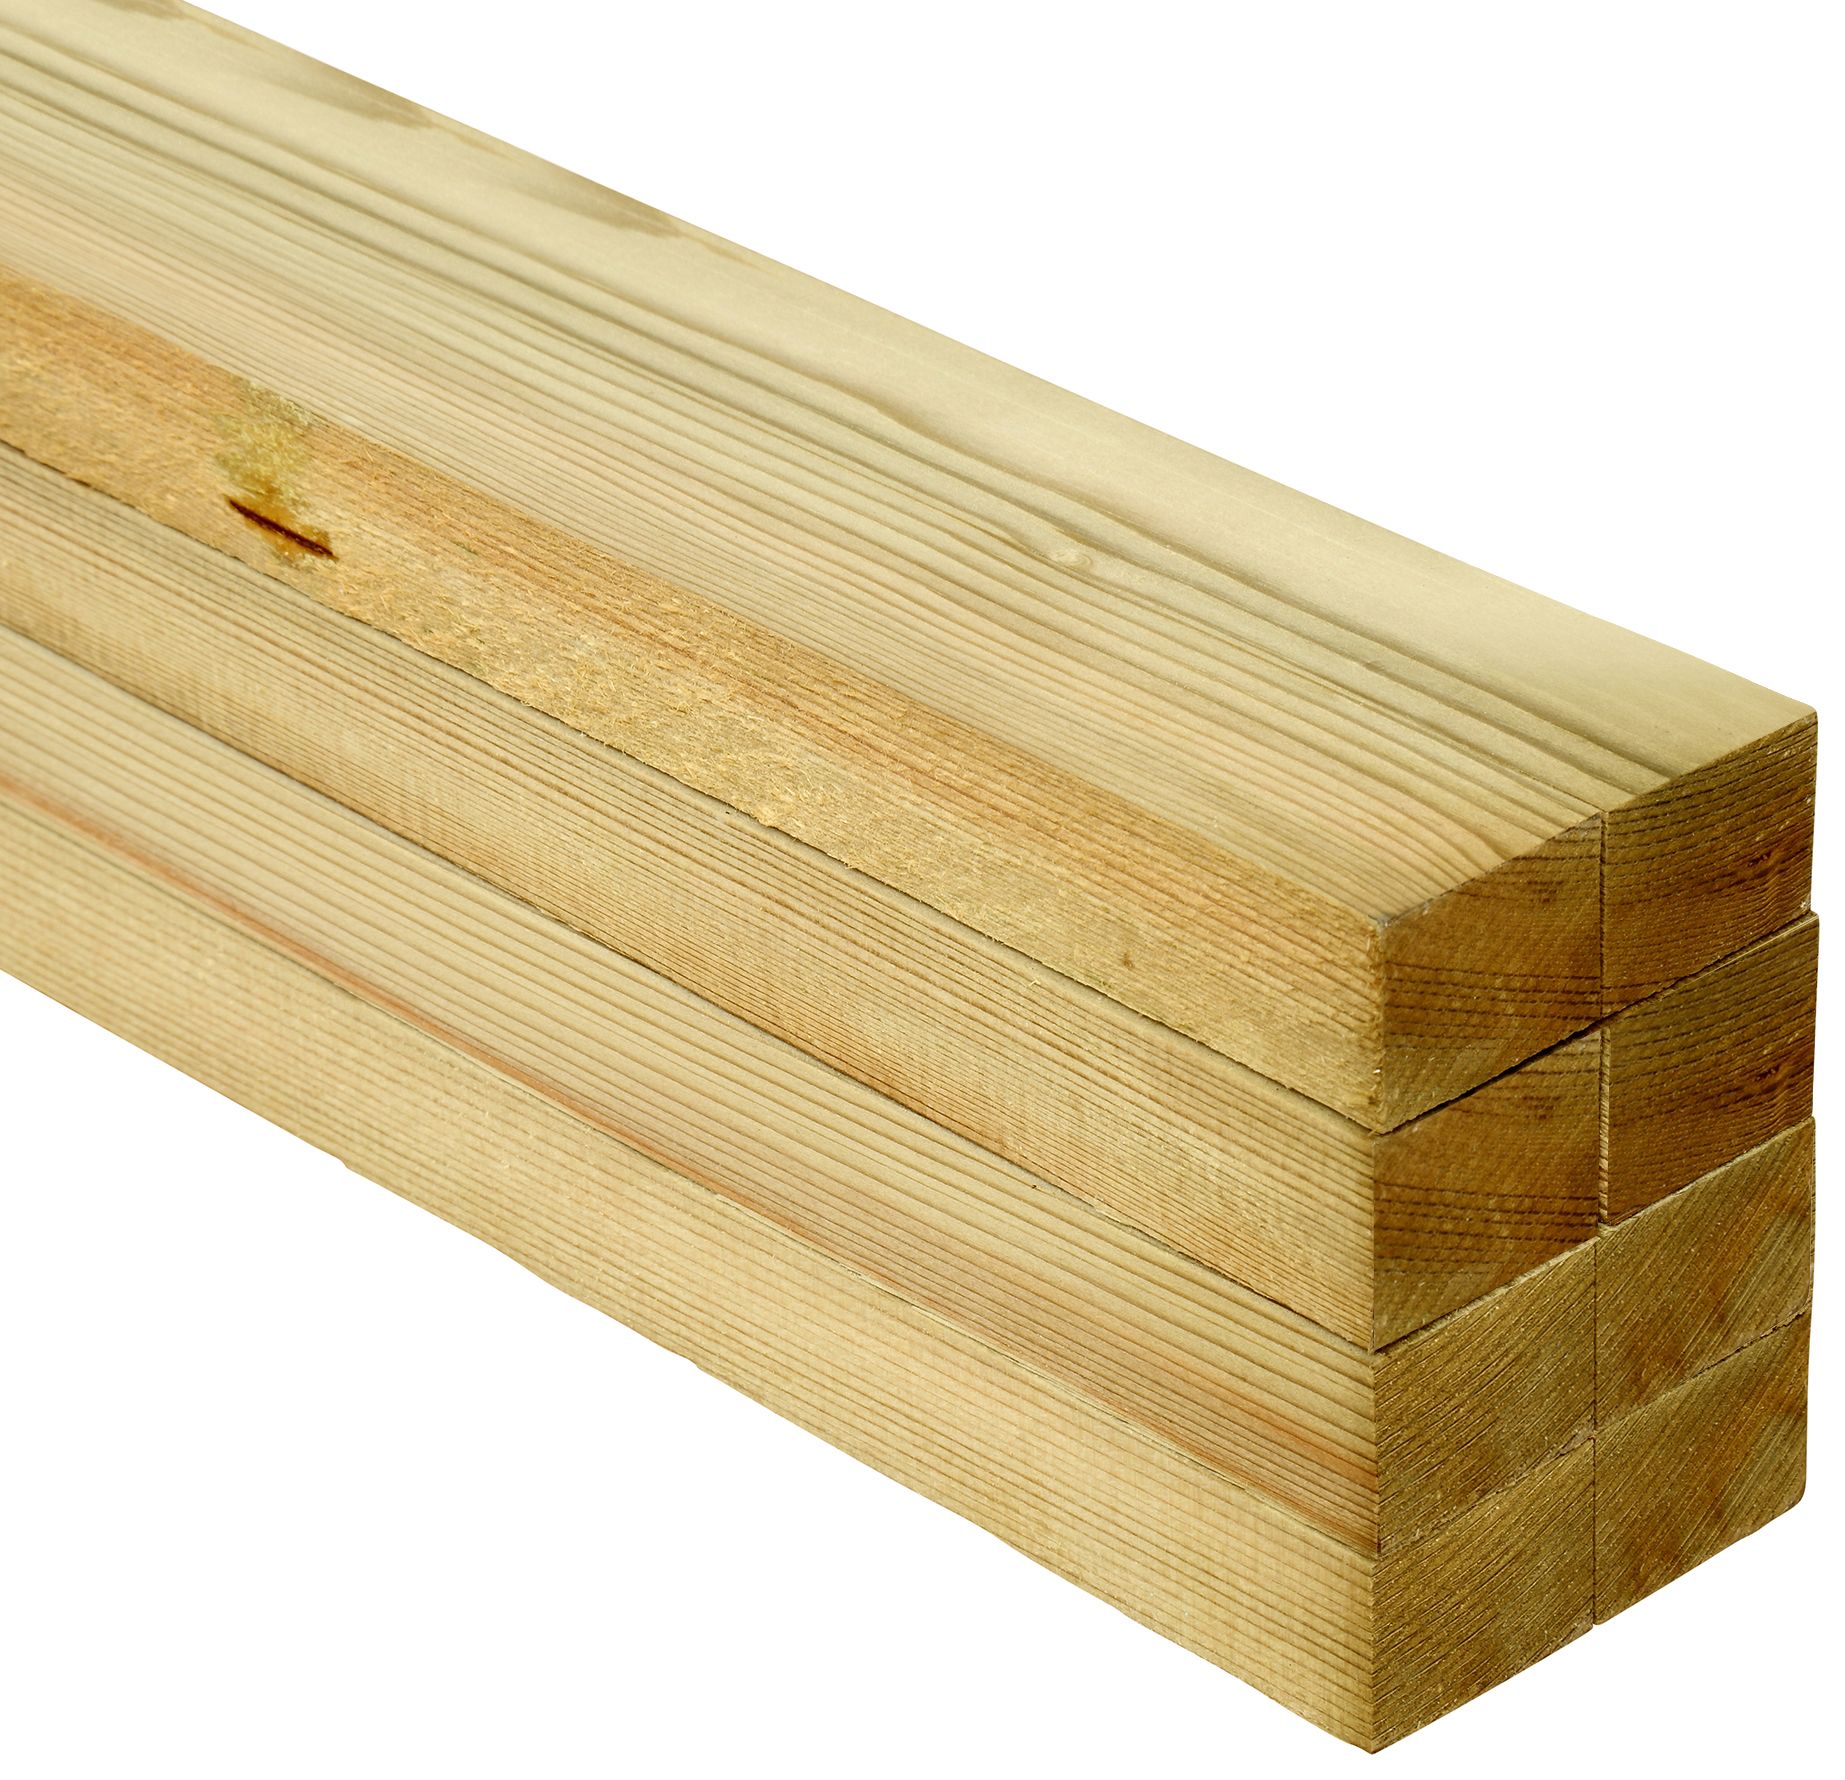 Image of Treated Sawn Kiln Dried Timber - 25 x 38 x 3600m - Pack of 8